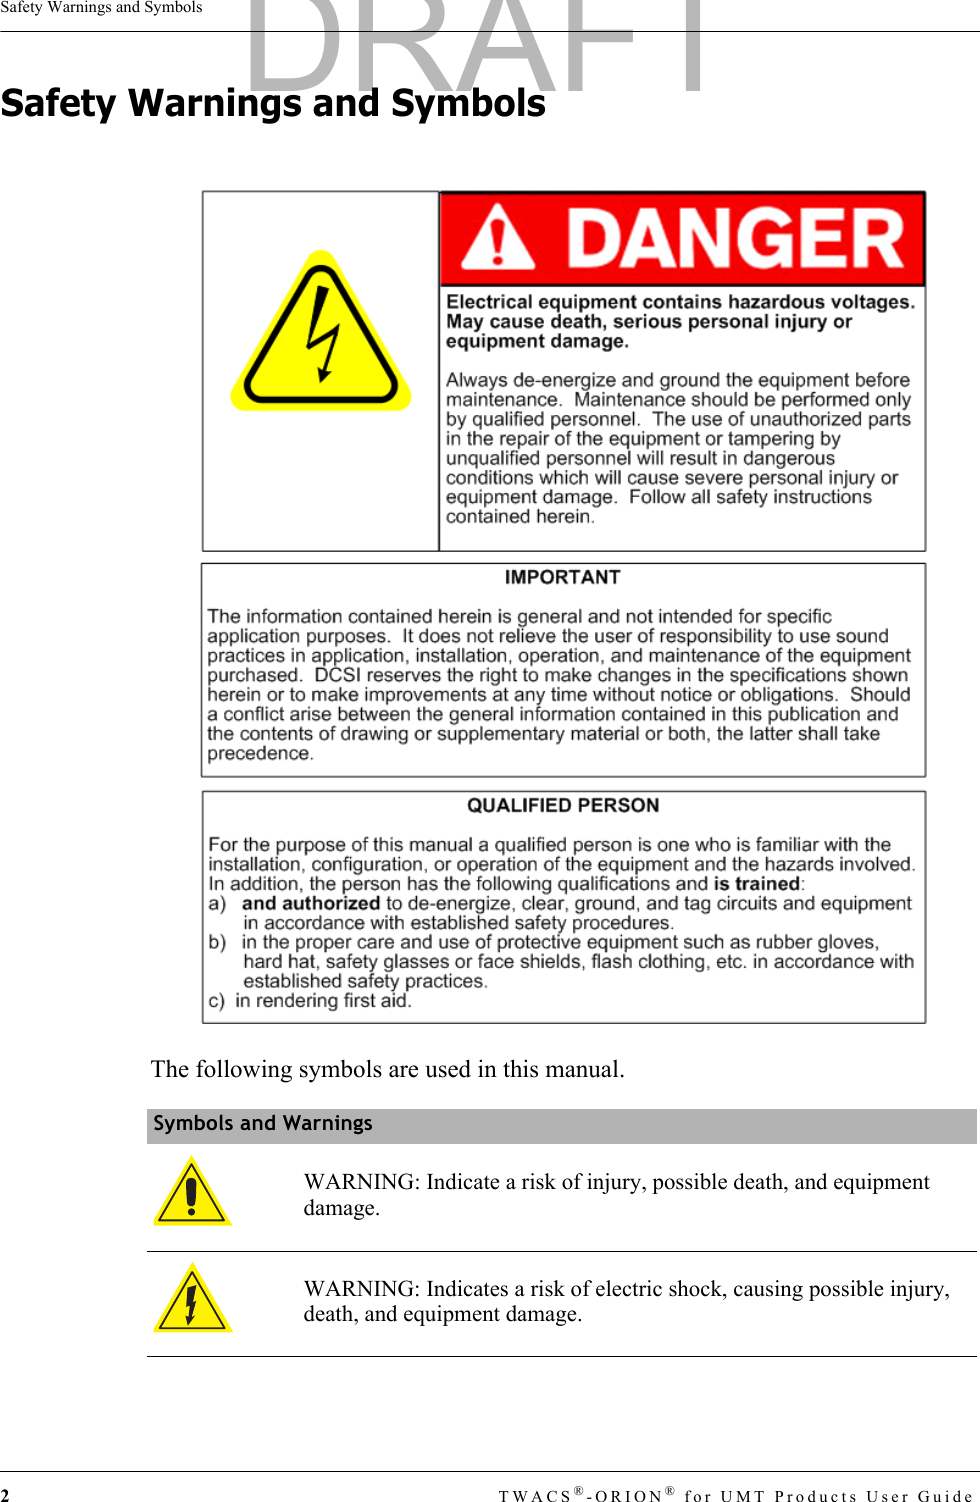 2TWACS®-ORION® for UMT Products User GuideSafety Warnings and SymbolsSafety Warnings and SymbolsThe following symbols are used in this manual.Symbols and WarningsWARNING: Indicate a risk of injury, possible death, and equipment damage.WARNING: Indicates a risk of electric shock, causing possible injury, death, and equipment damage.DRAFT